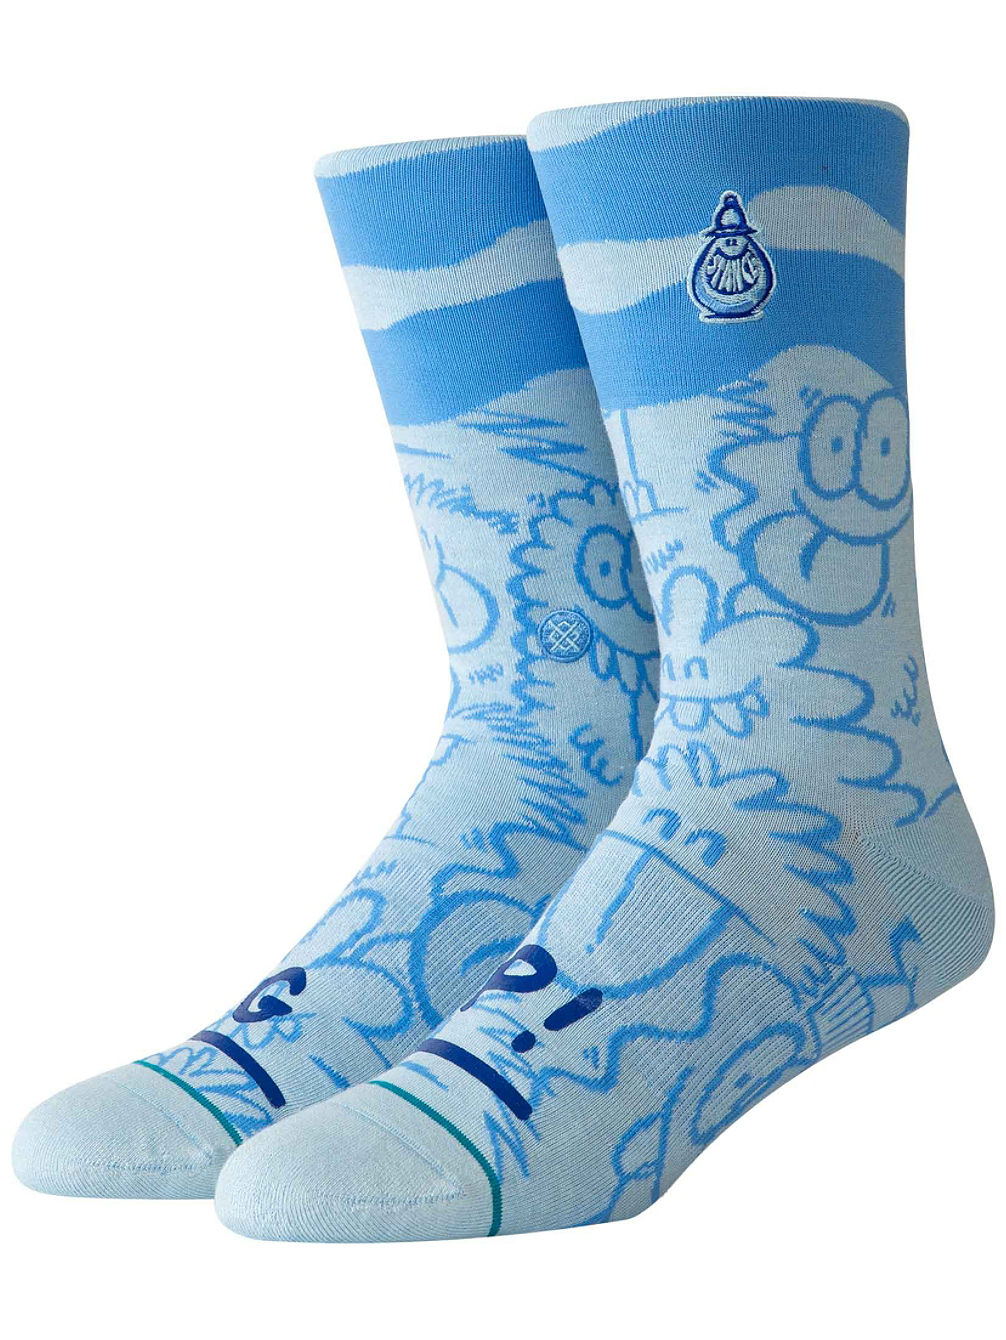 Kevin Lyons Wave Chaussettes